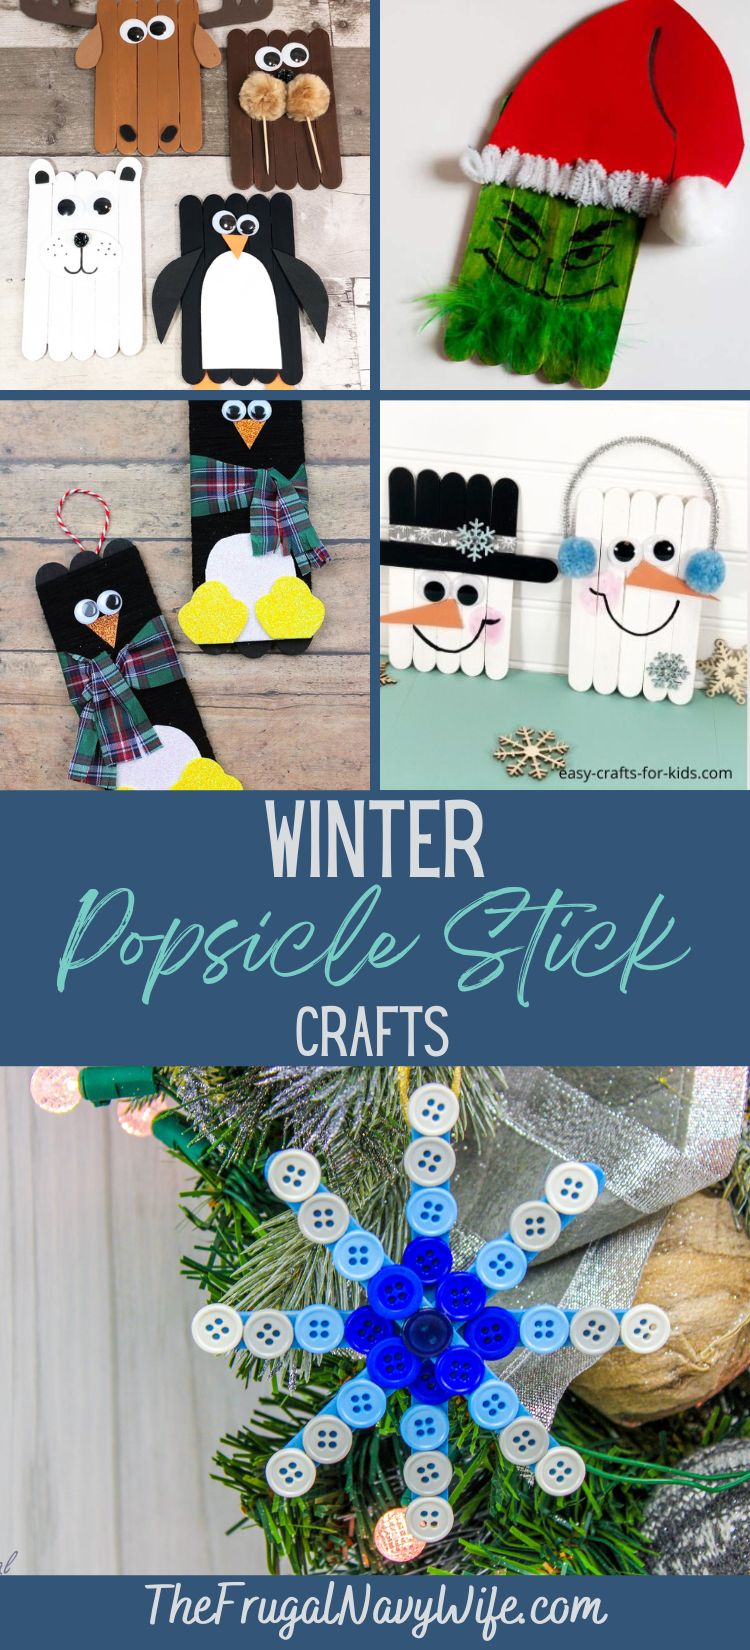 Crafts With Popsicle Sticks - The Ultimate Crafts